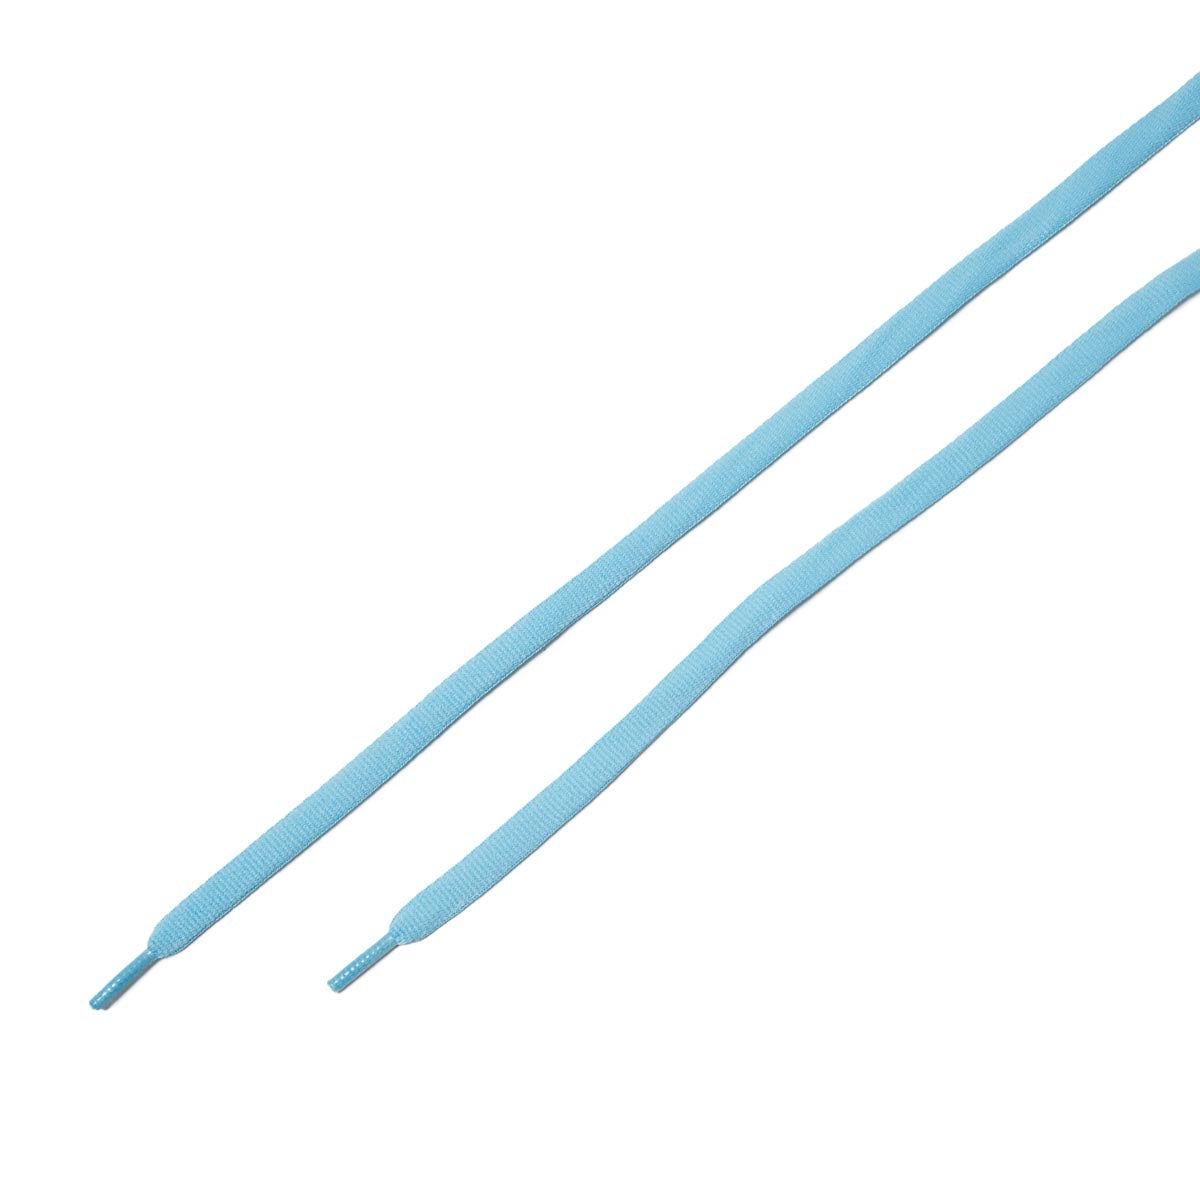 CCS Oval Shoelaces - Baby Blue image 2